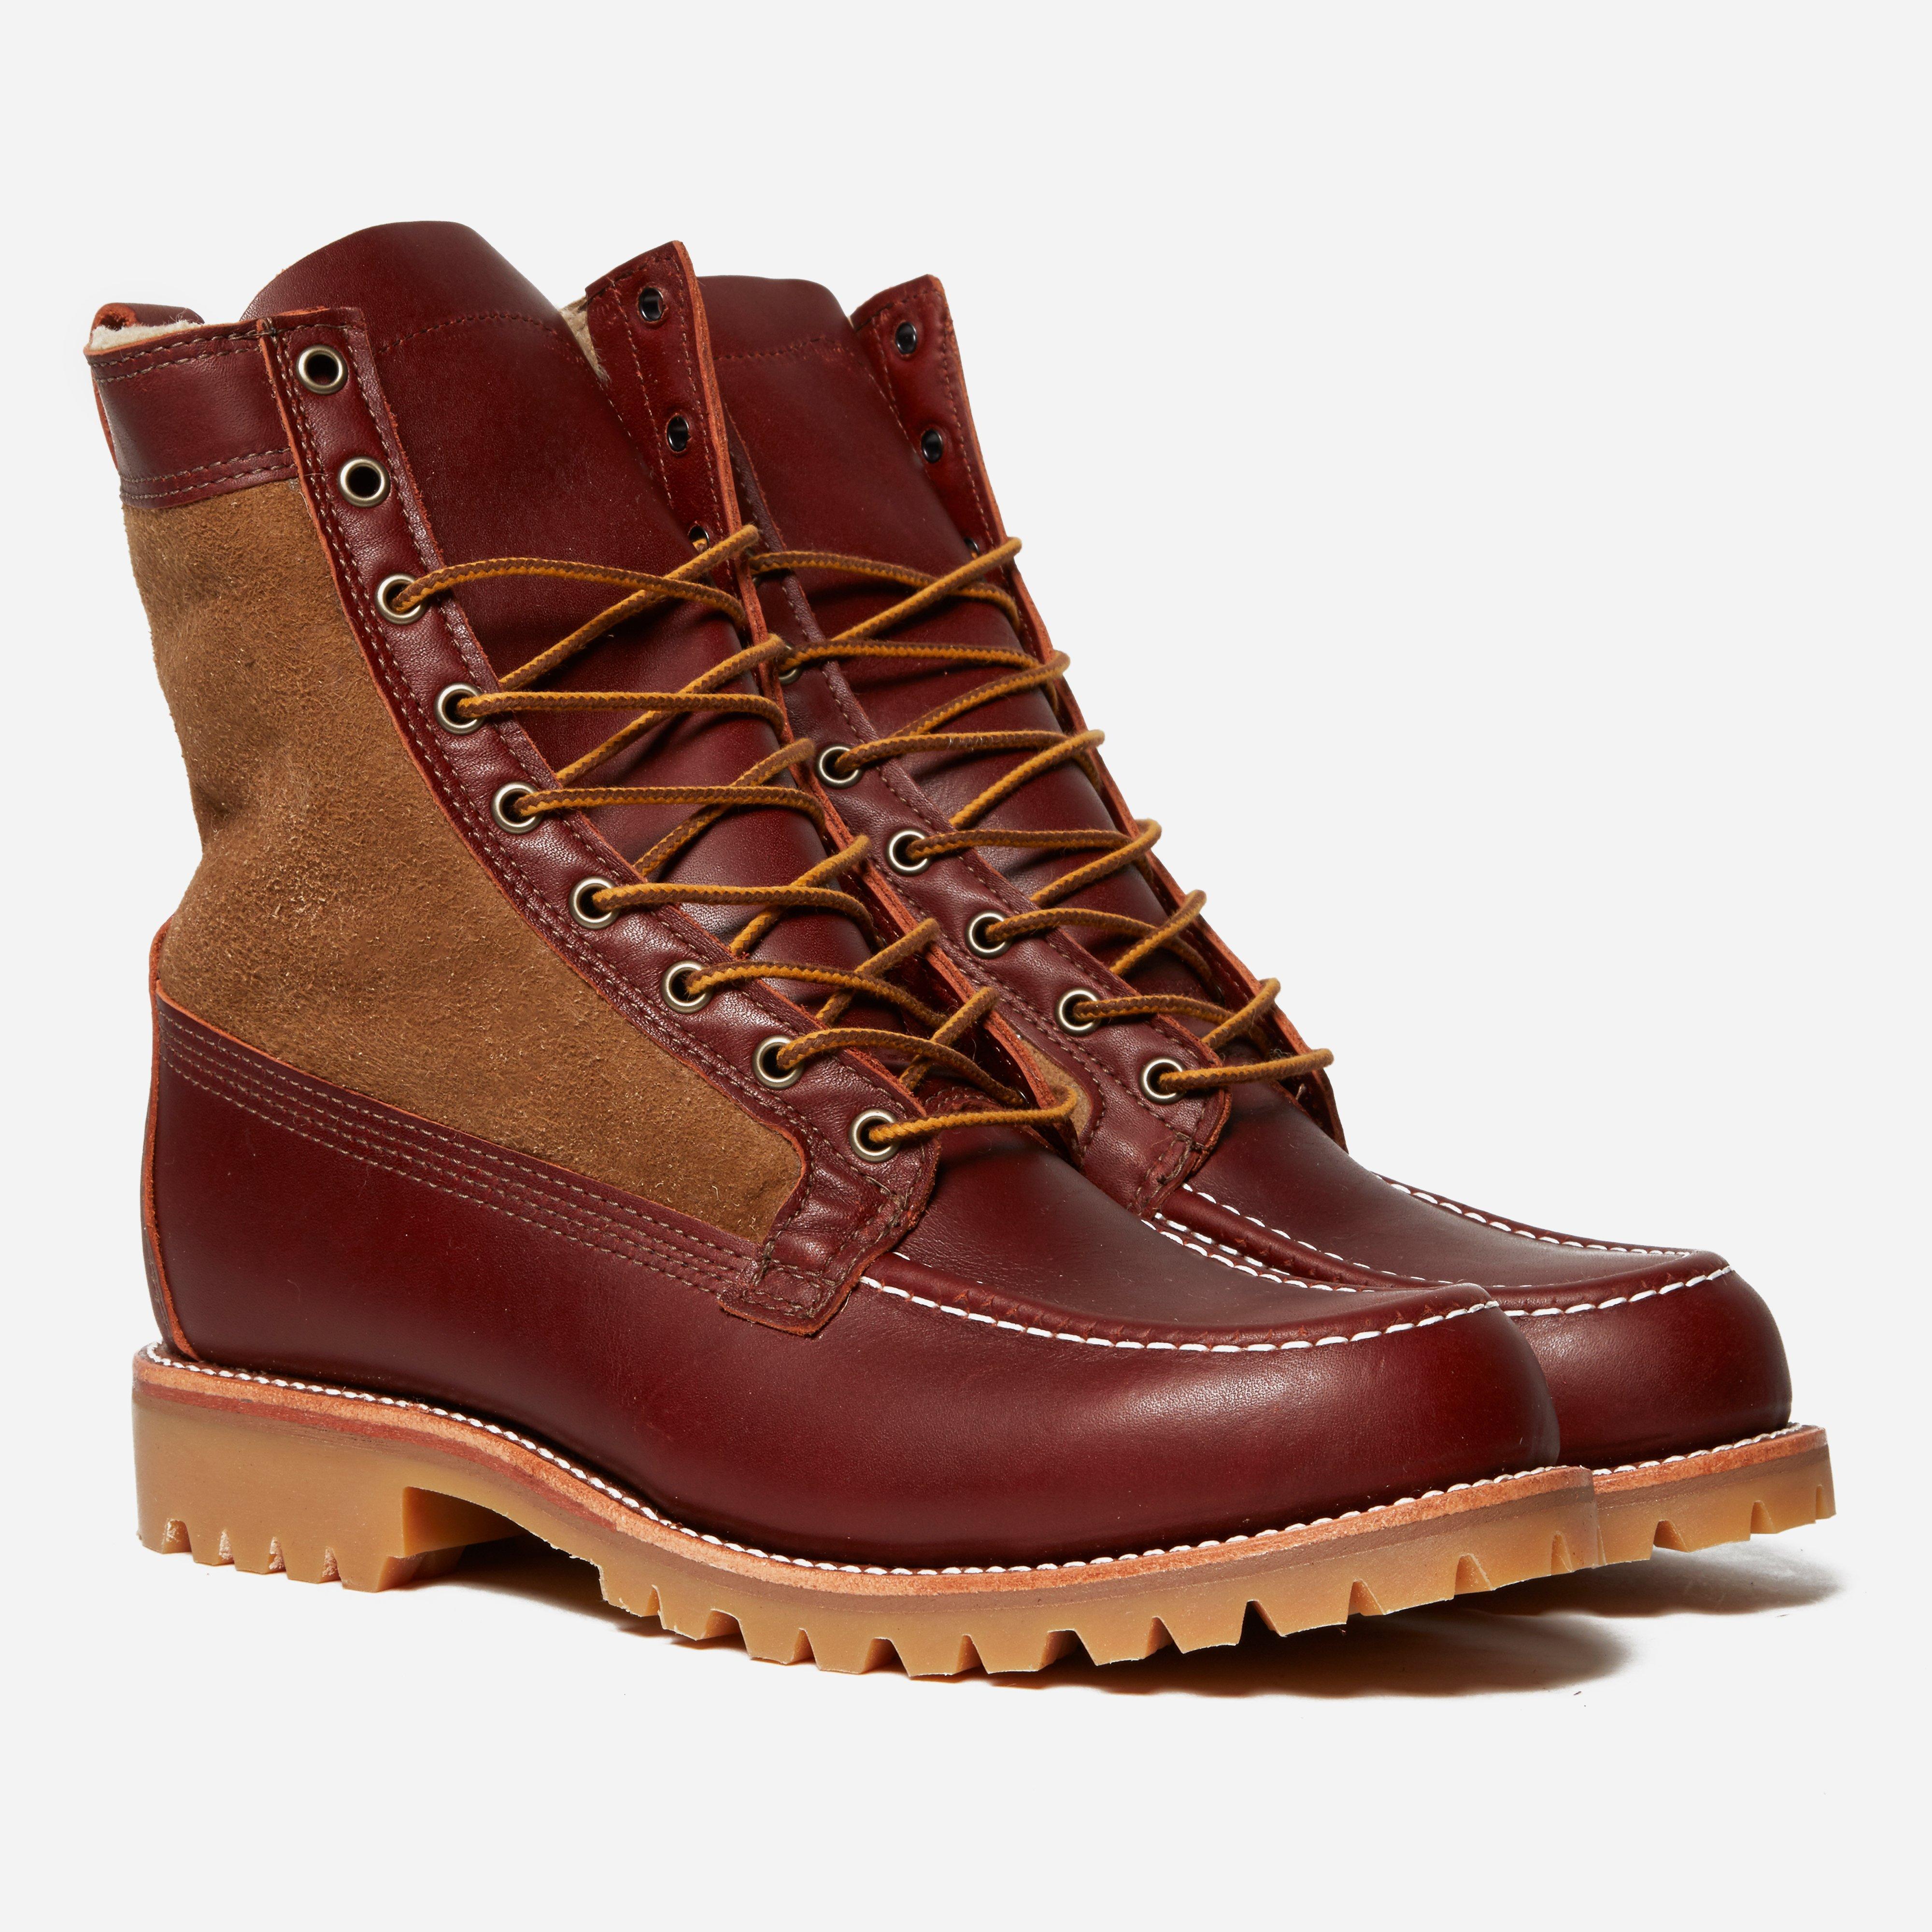 Shearling Hunting Boot Outlaw in Tan 